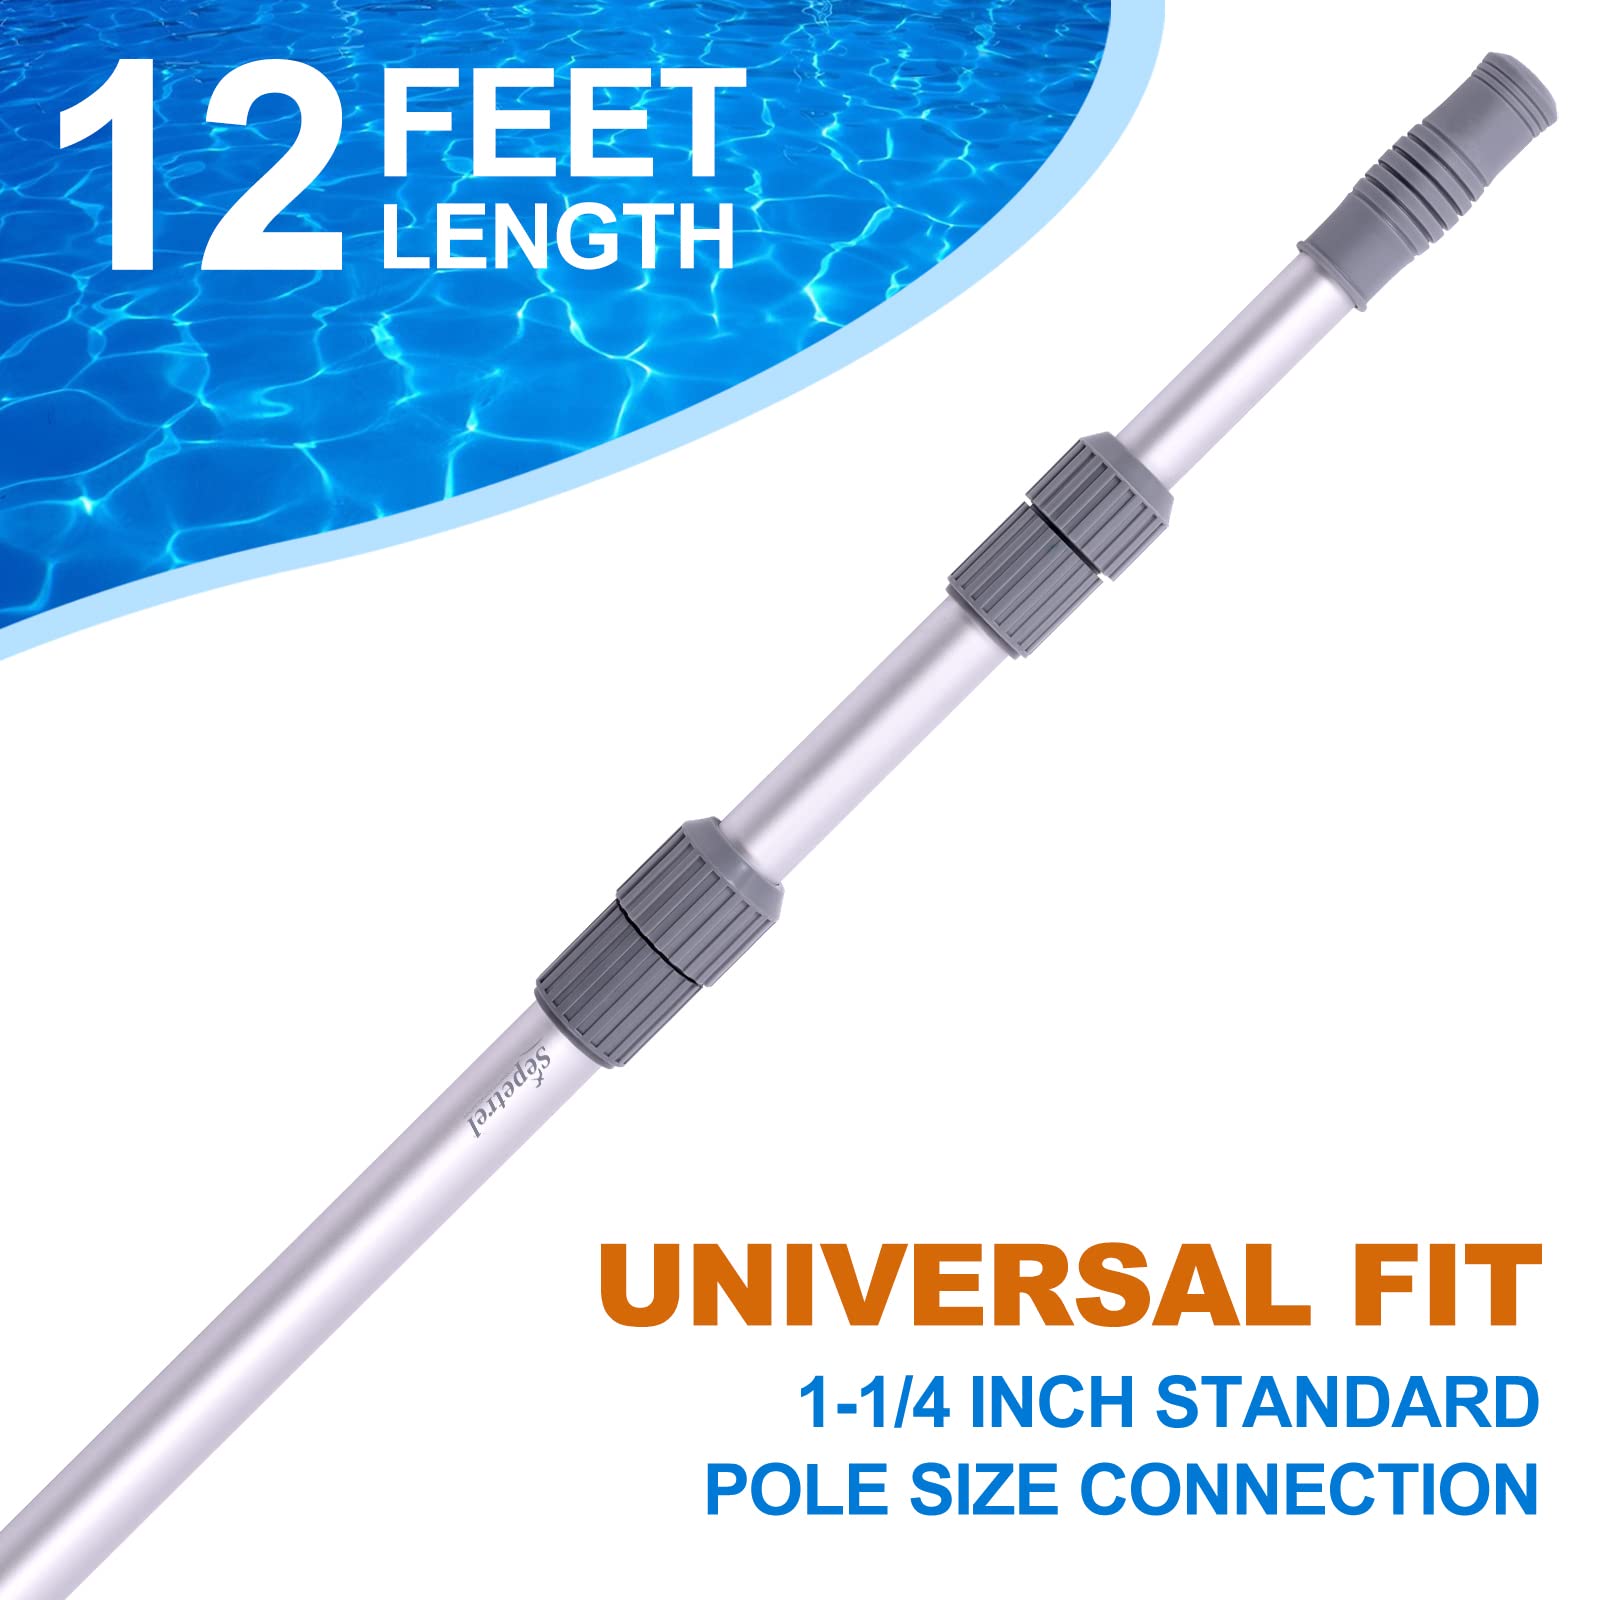 Sepetrel Pool Pole - Professional 12 Foot Telescoping Swimming Pool Cleaning Poles,Adjustable 2 Piece Telescopic Pole,for Skimmer Net,Brush,Vacuum Head